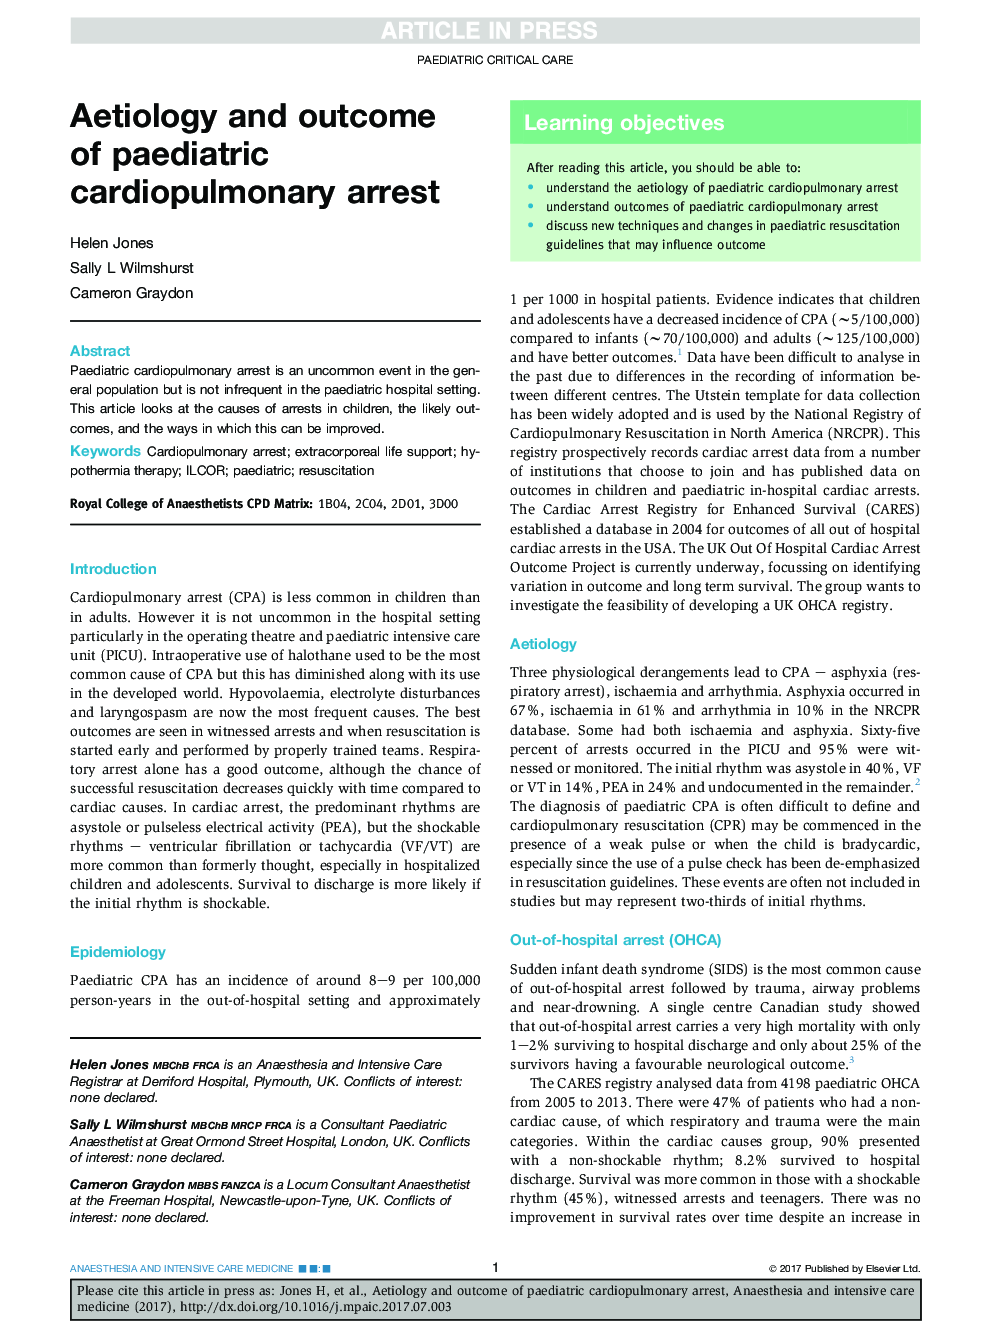 Aetiology and outcome of paediatric cardiopulmonary arrest